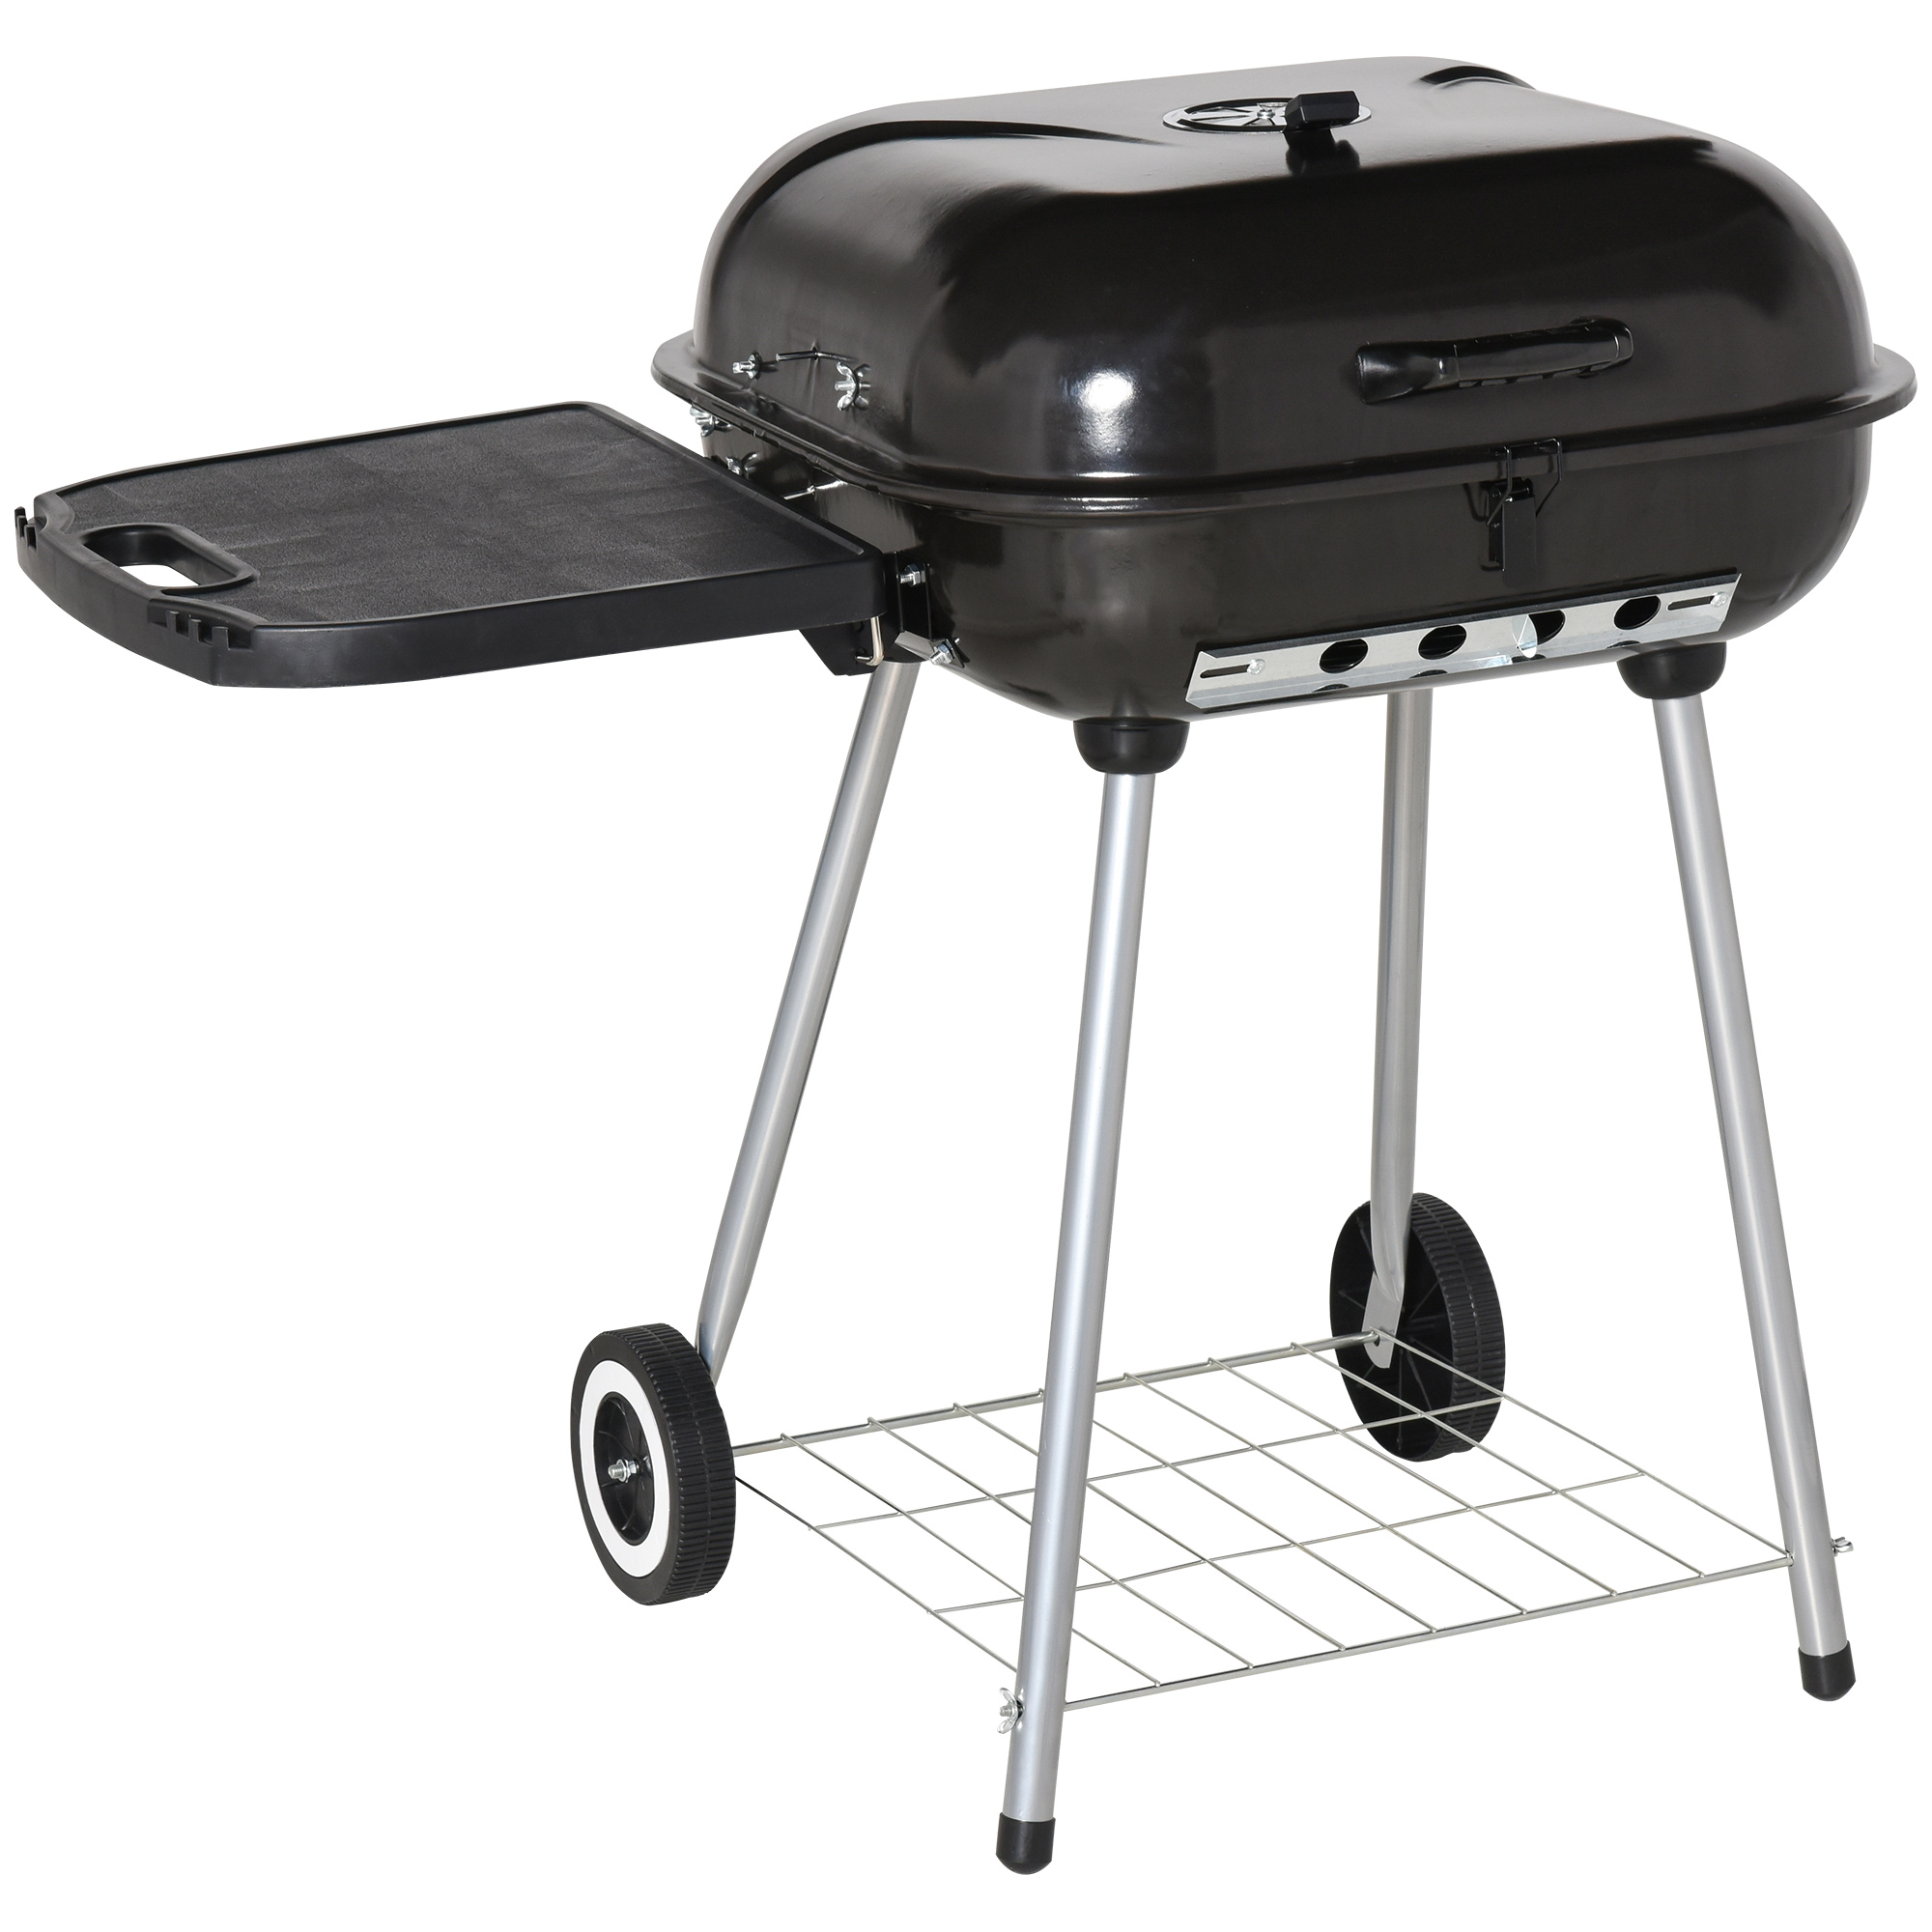 22" Portable Steel Charcoal Grill